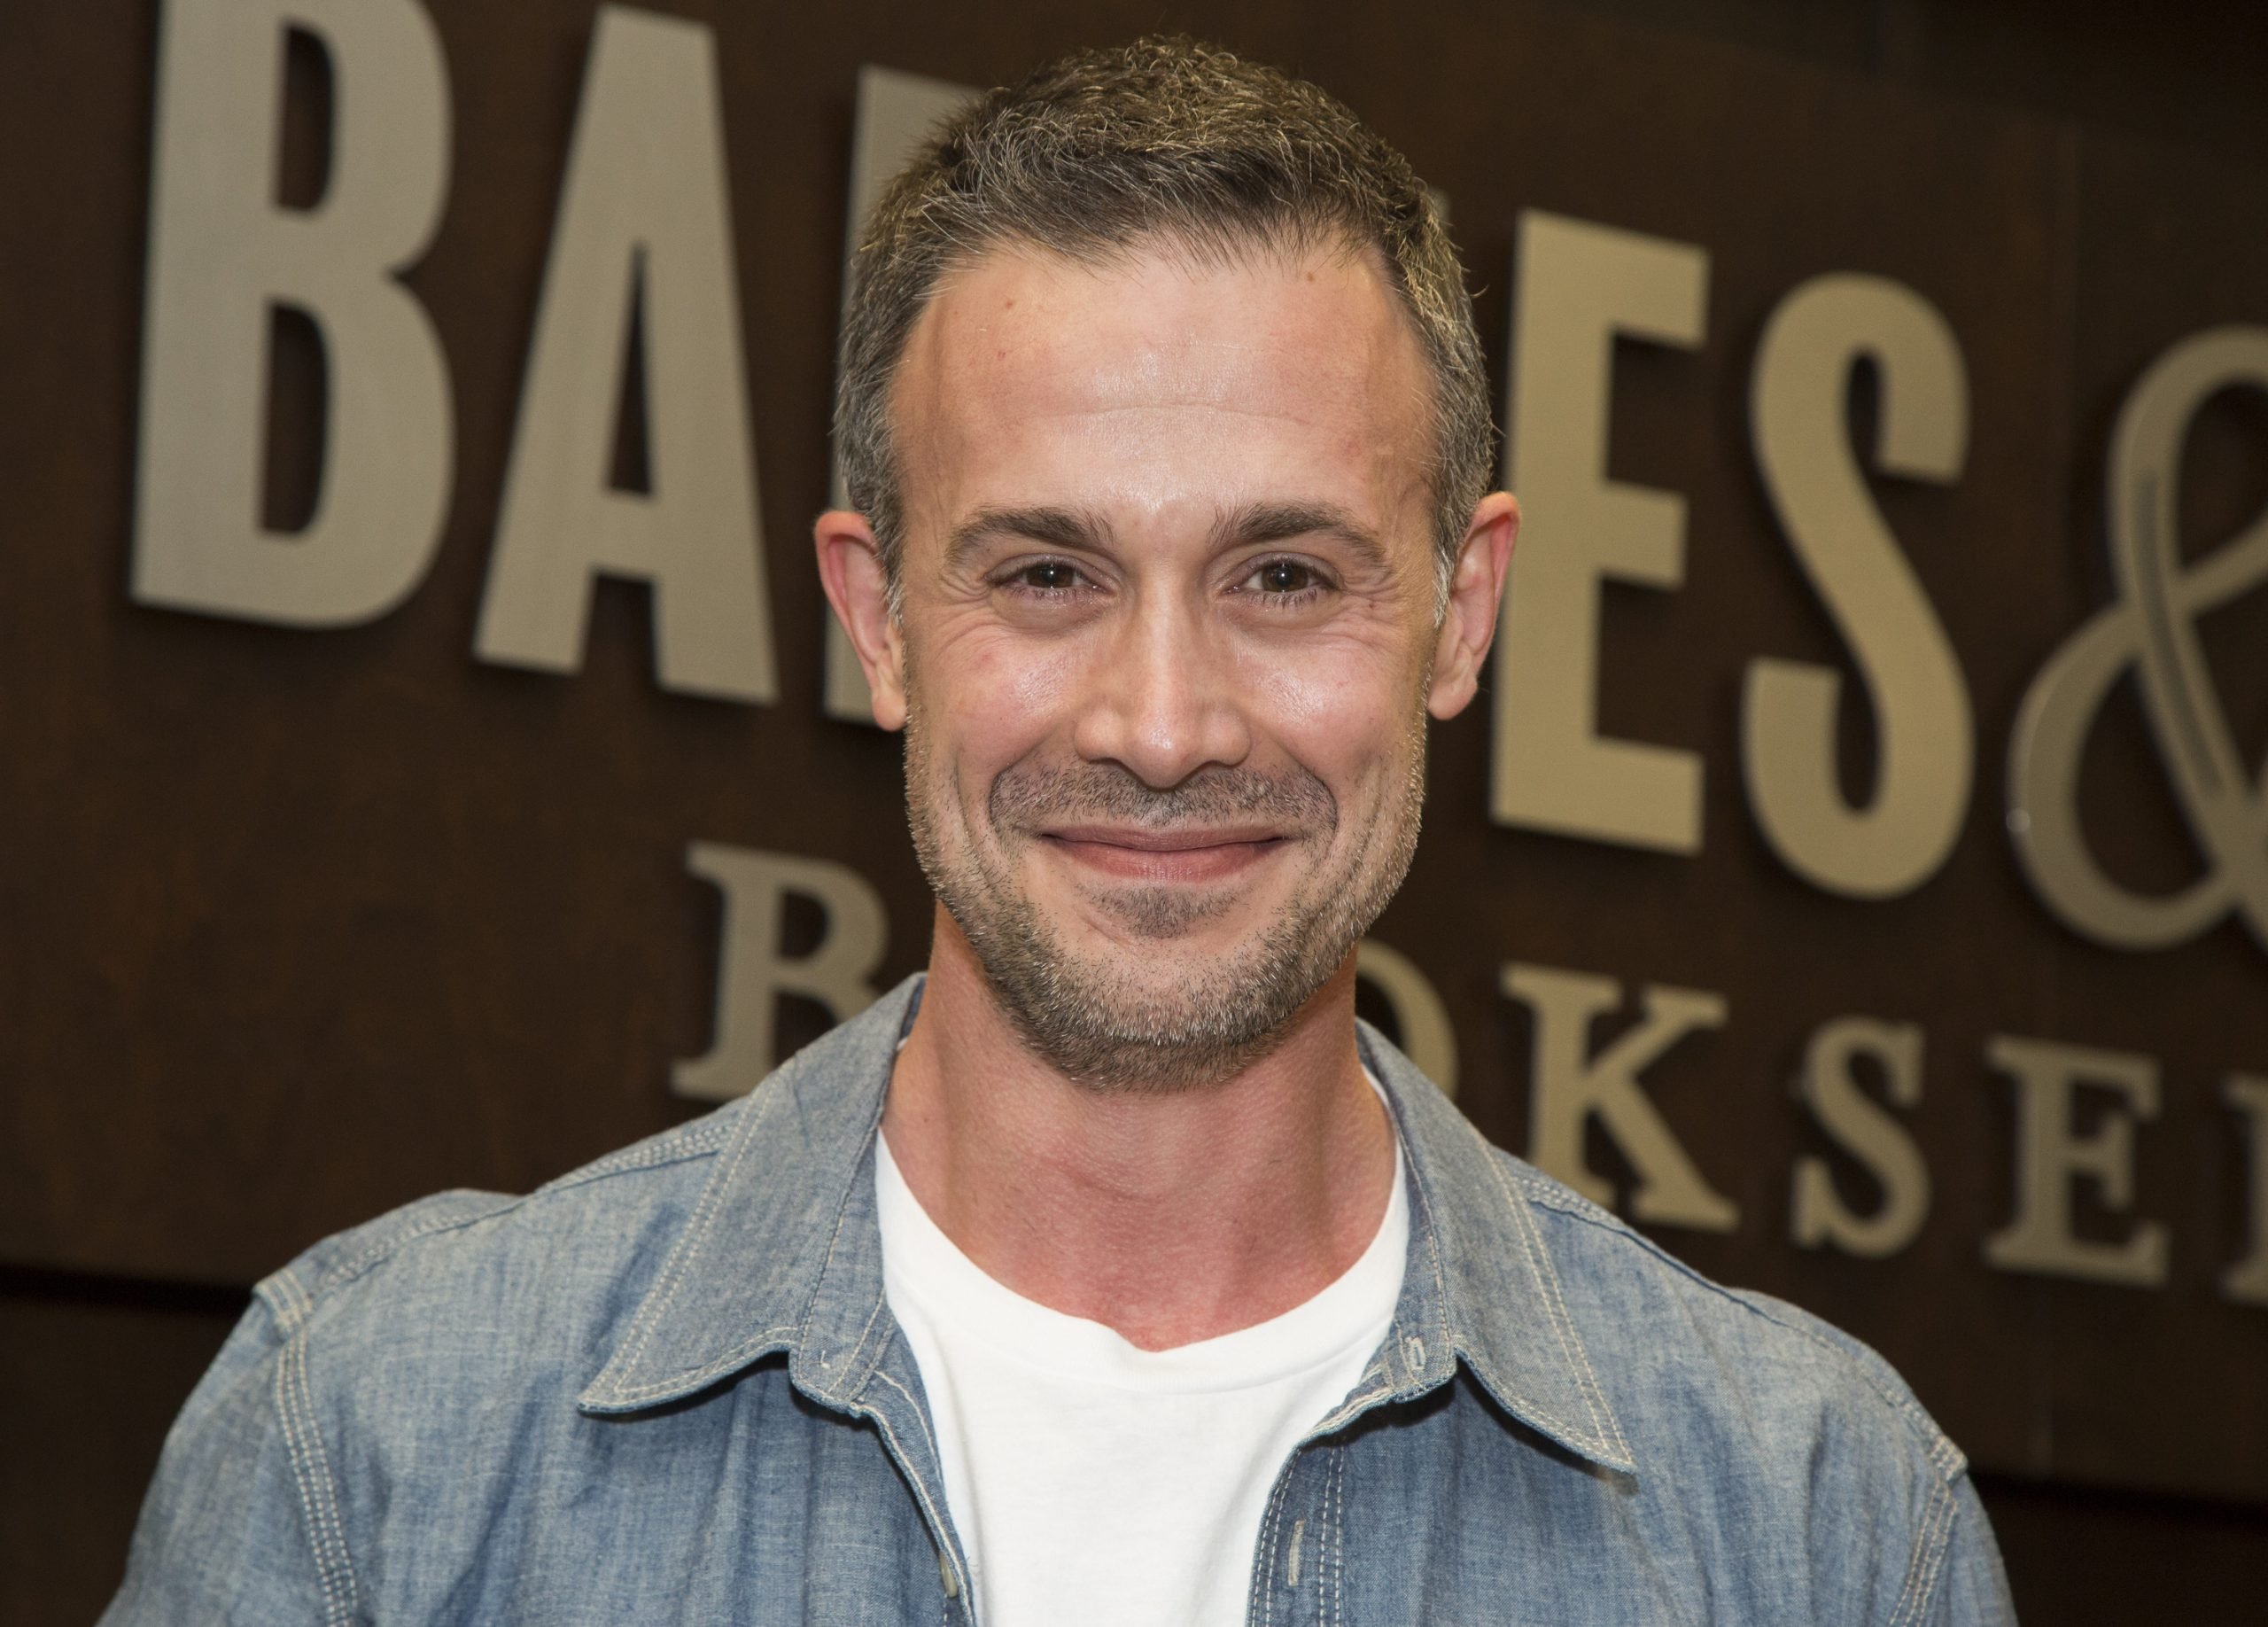 Freddie Prinze Jr On His Vocal Cameo in The Rise of Skywalker - Star Wars  News Net